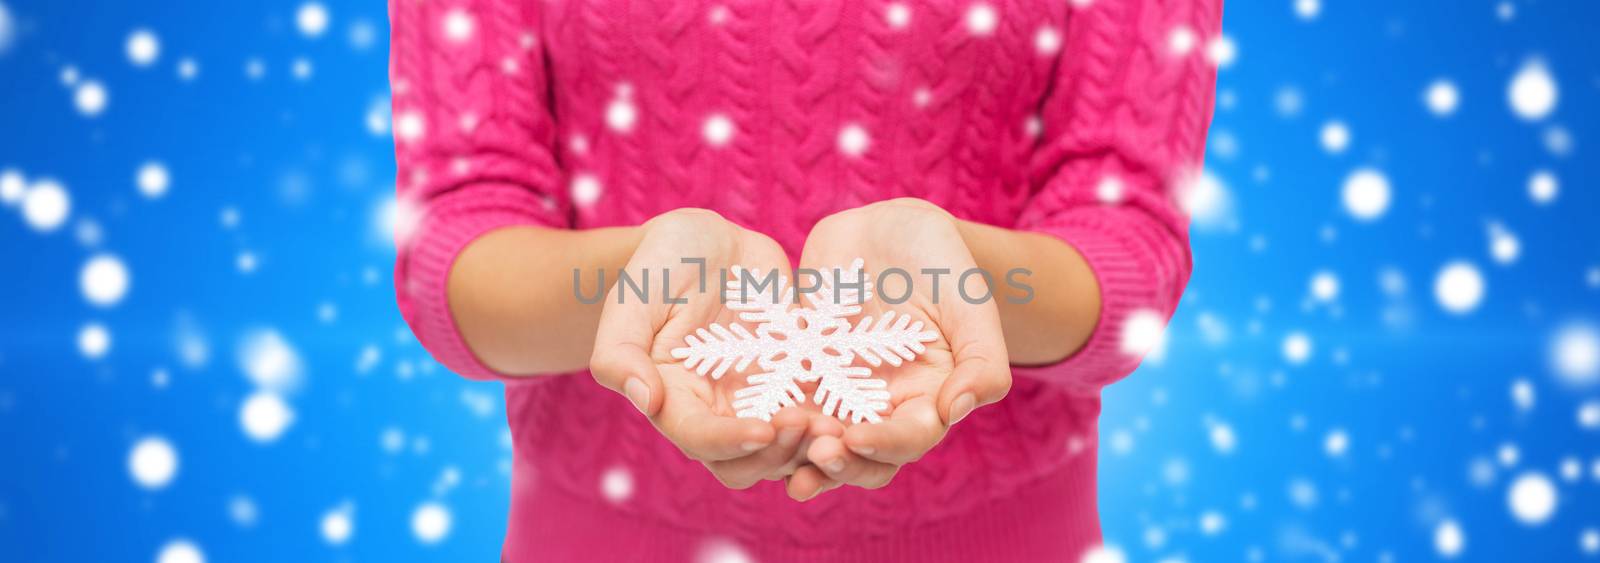 christmas, holidays and people concept - close up of woman in pink sweater holding snowflake blue snowy background